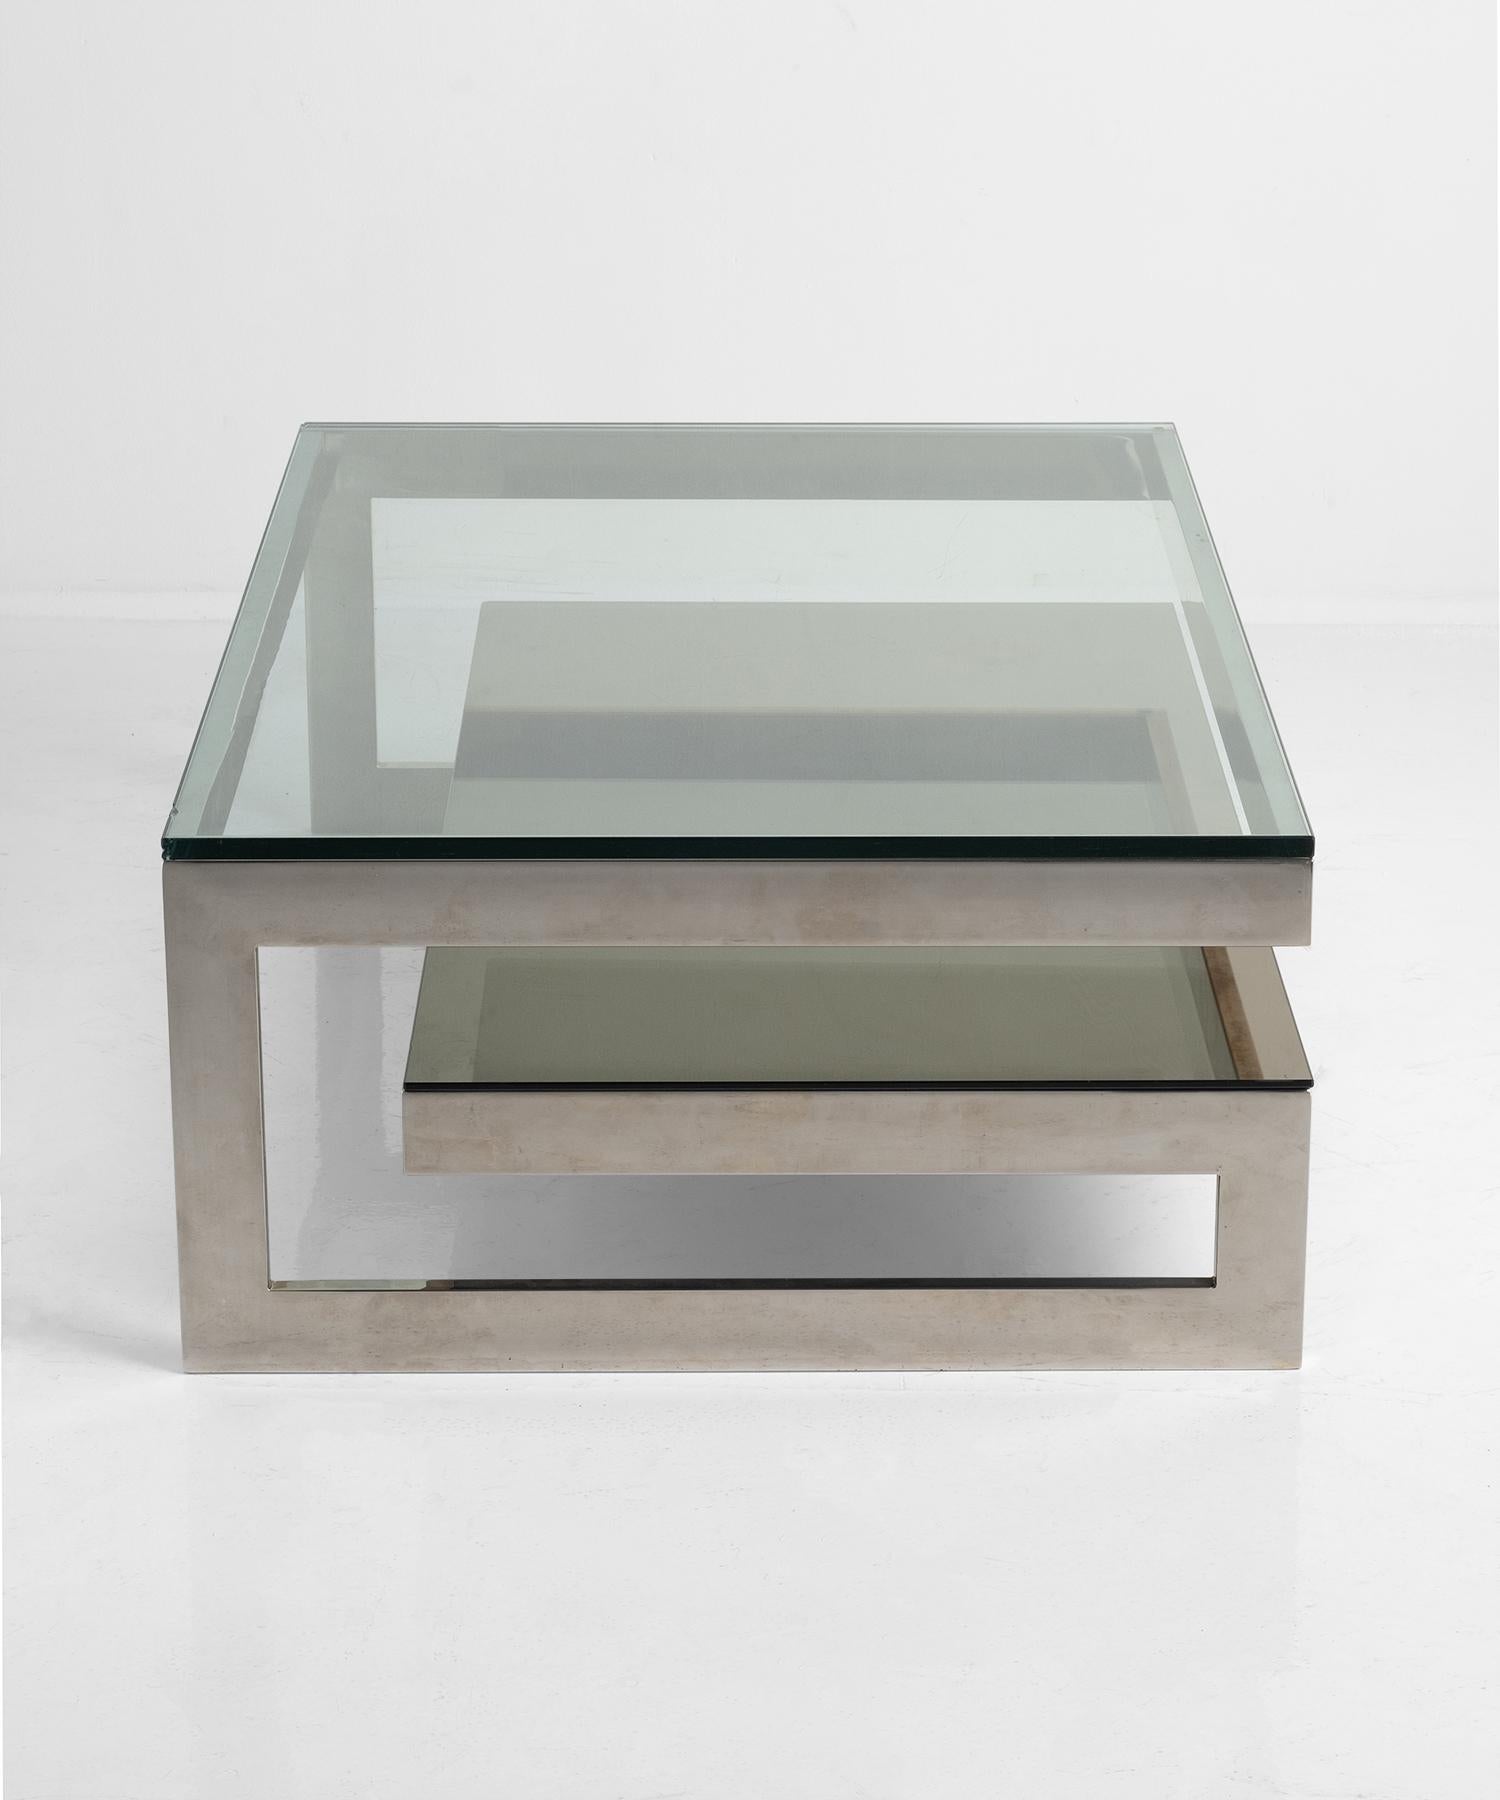 “G” table by belgochrome in gilded metal with glass and mirror tops.